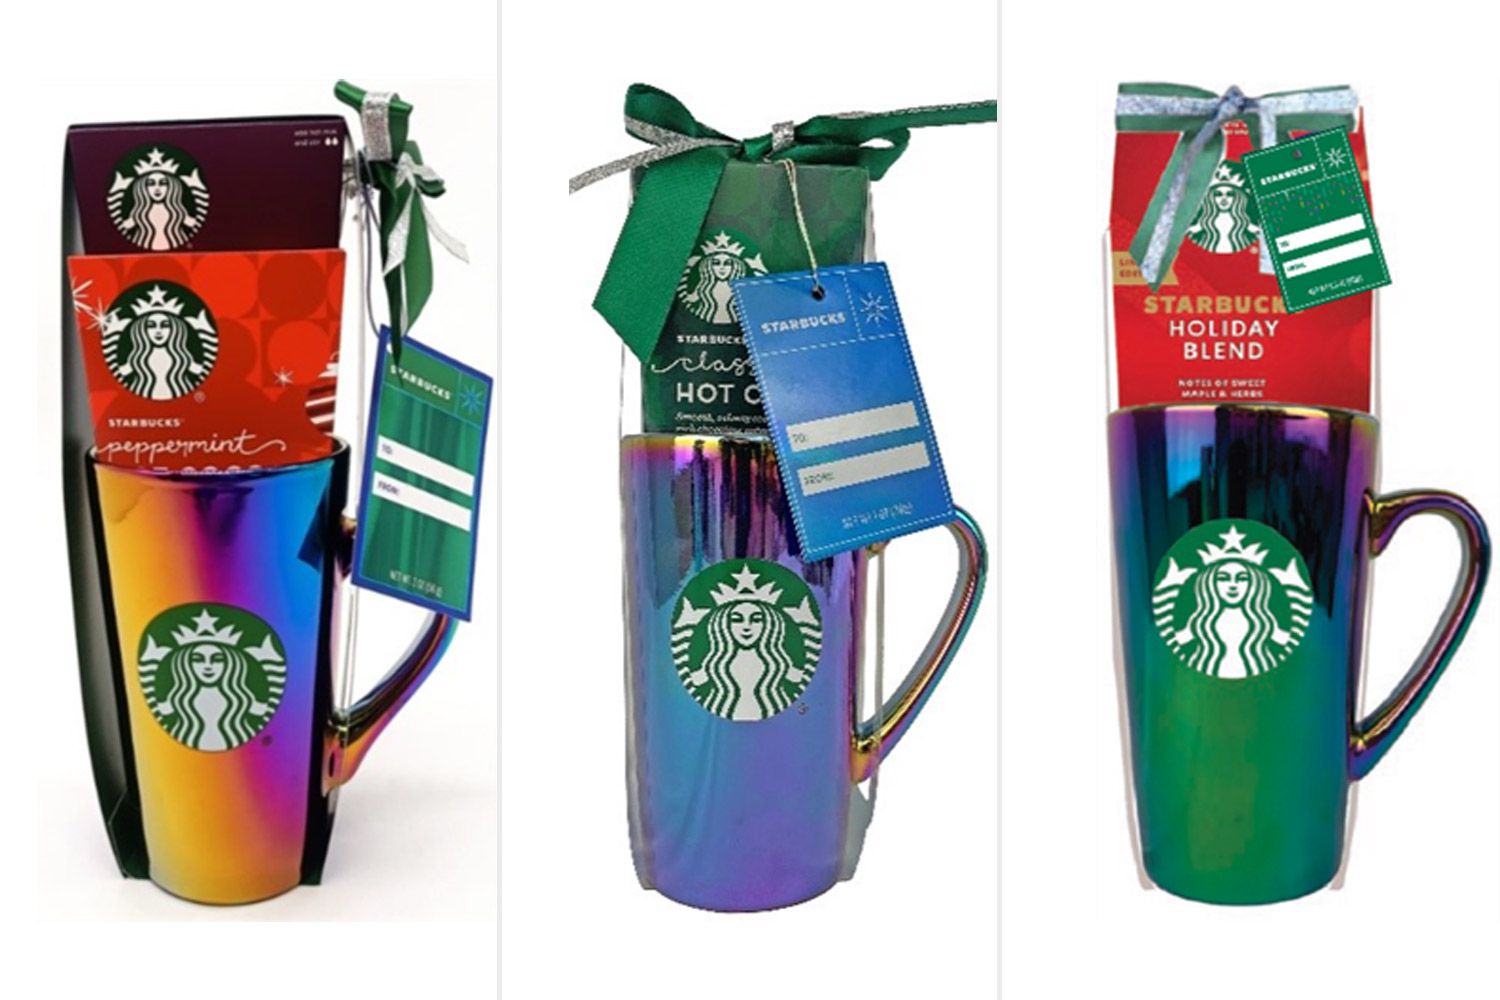 Nestle USA Has Recalled Starbucks-Branded Silver Mugs Due to Burn Incidents